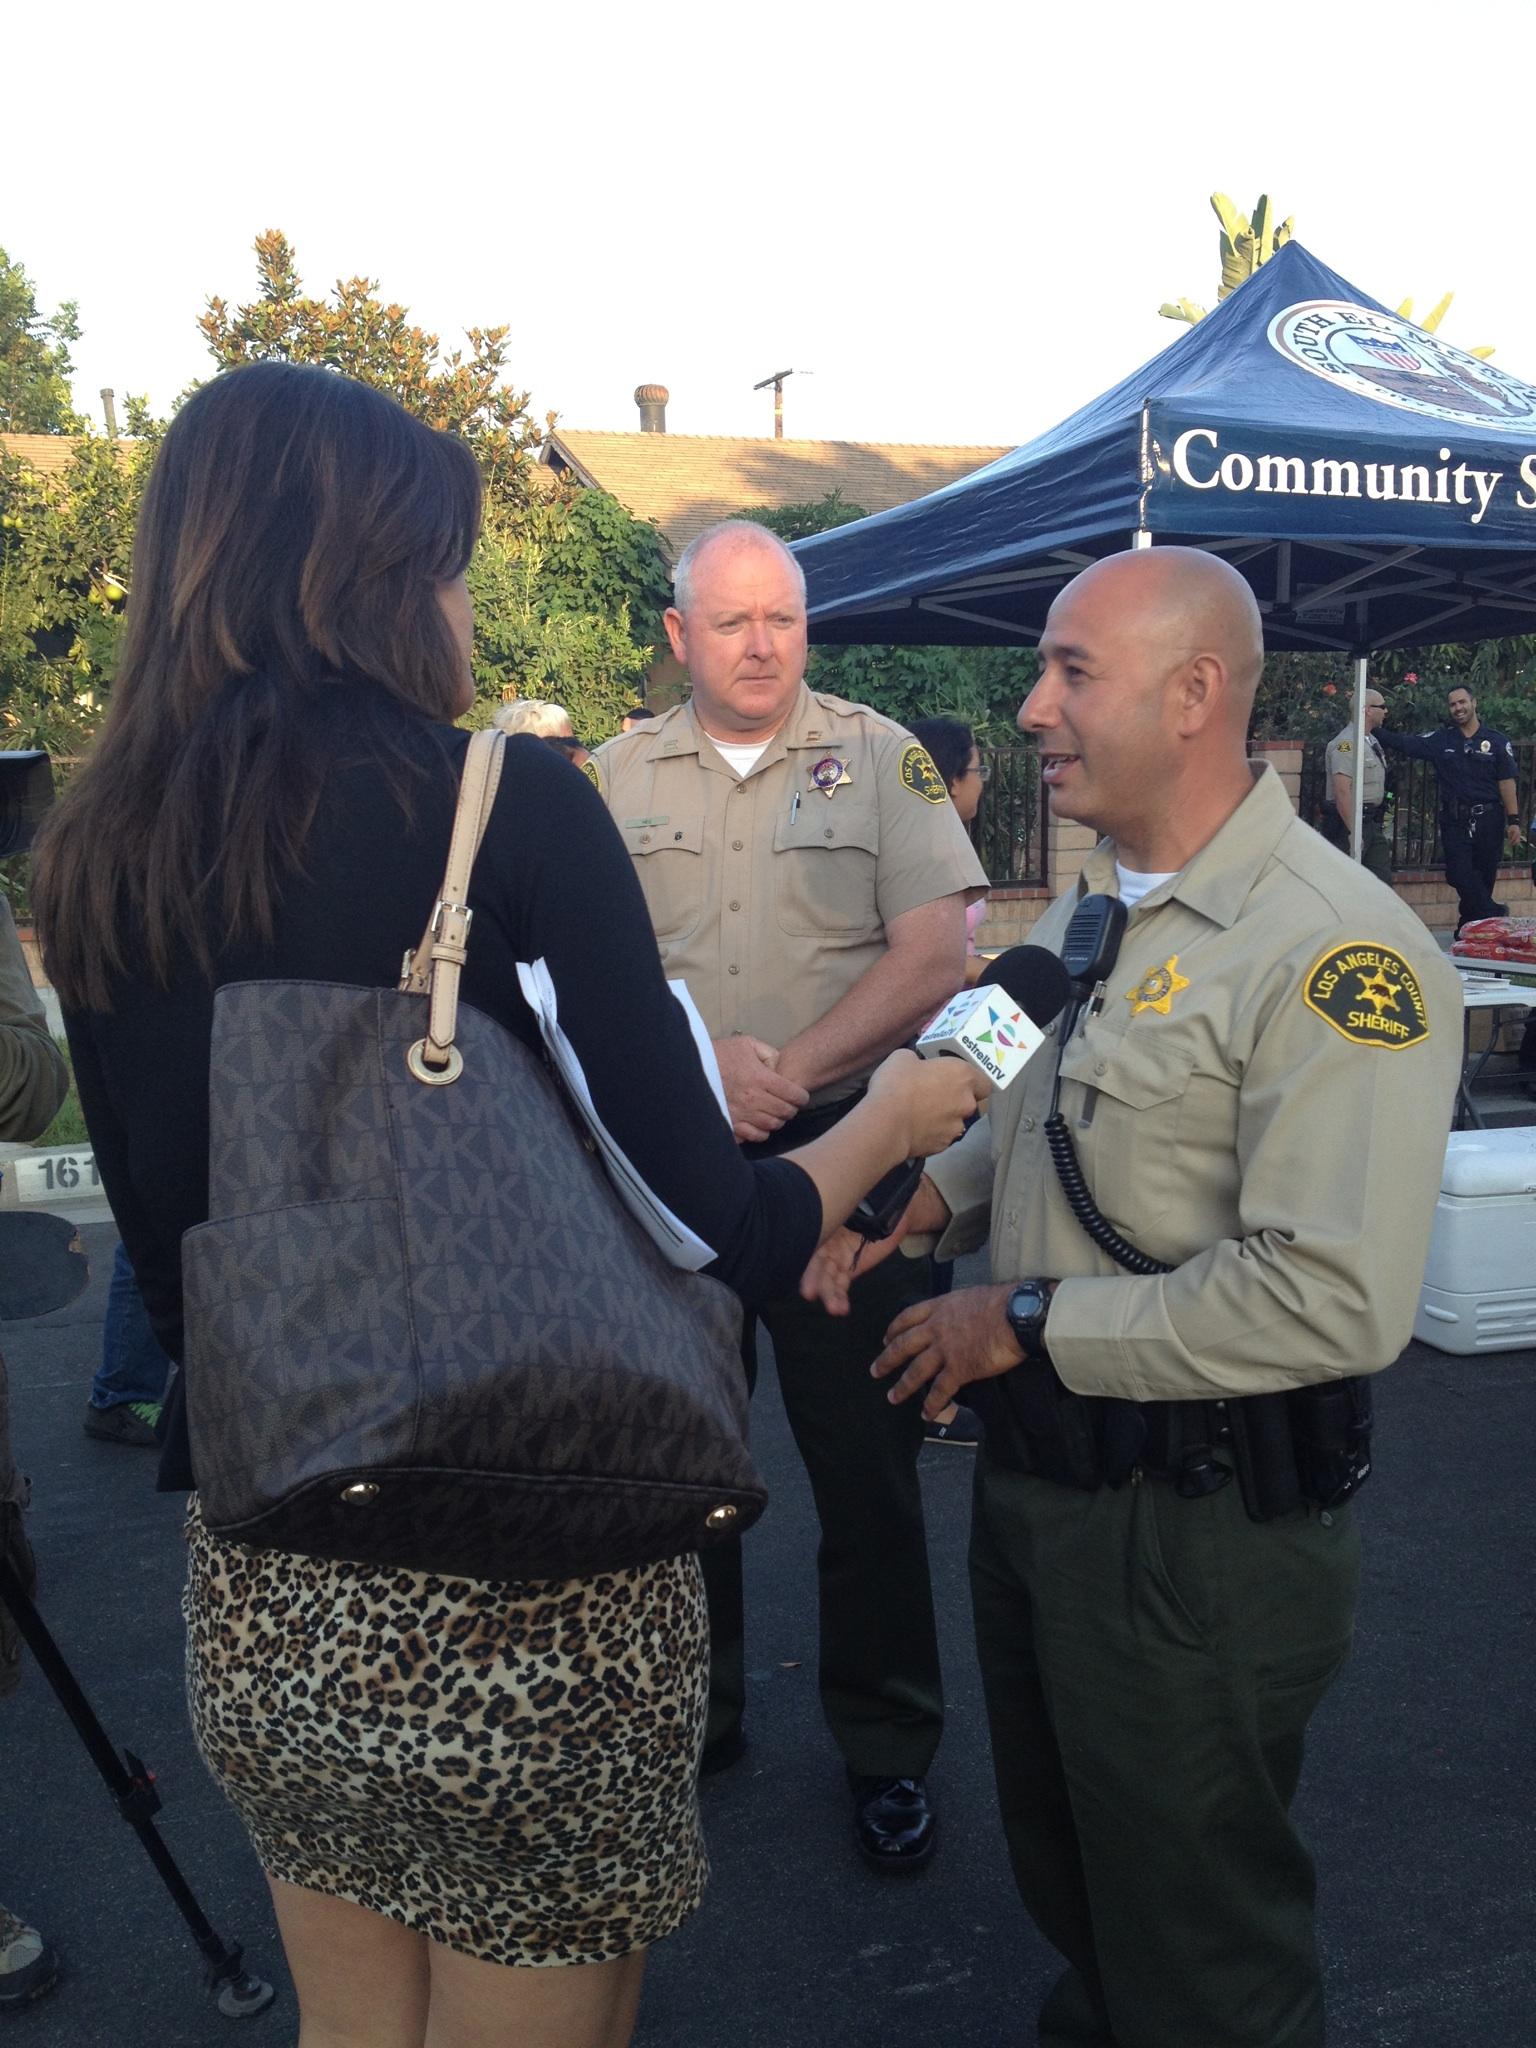 South El Monte Special Assignment Deputy Ayon being interviewed by Estrella TV Ch 62 